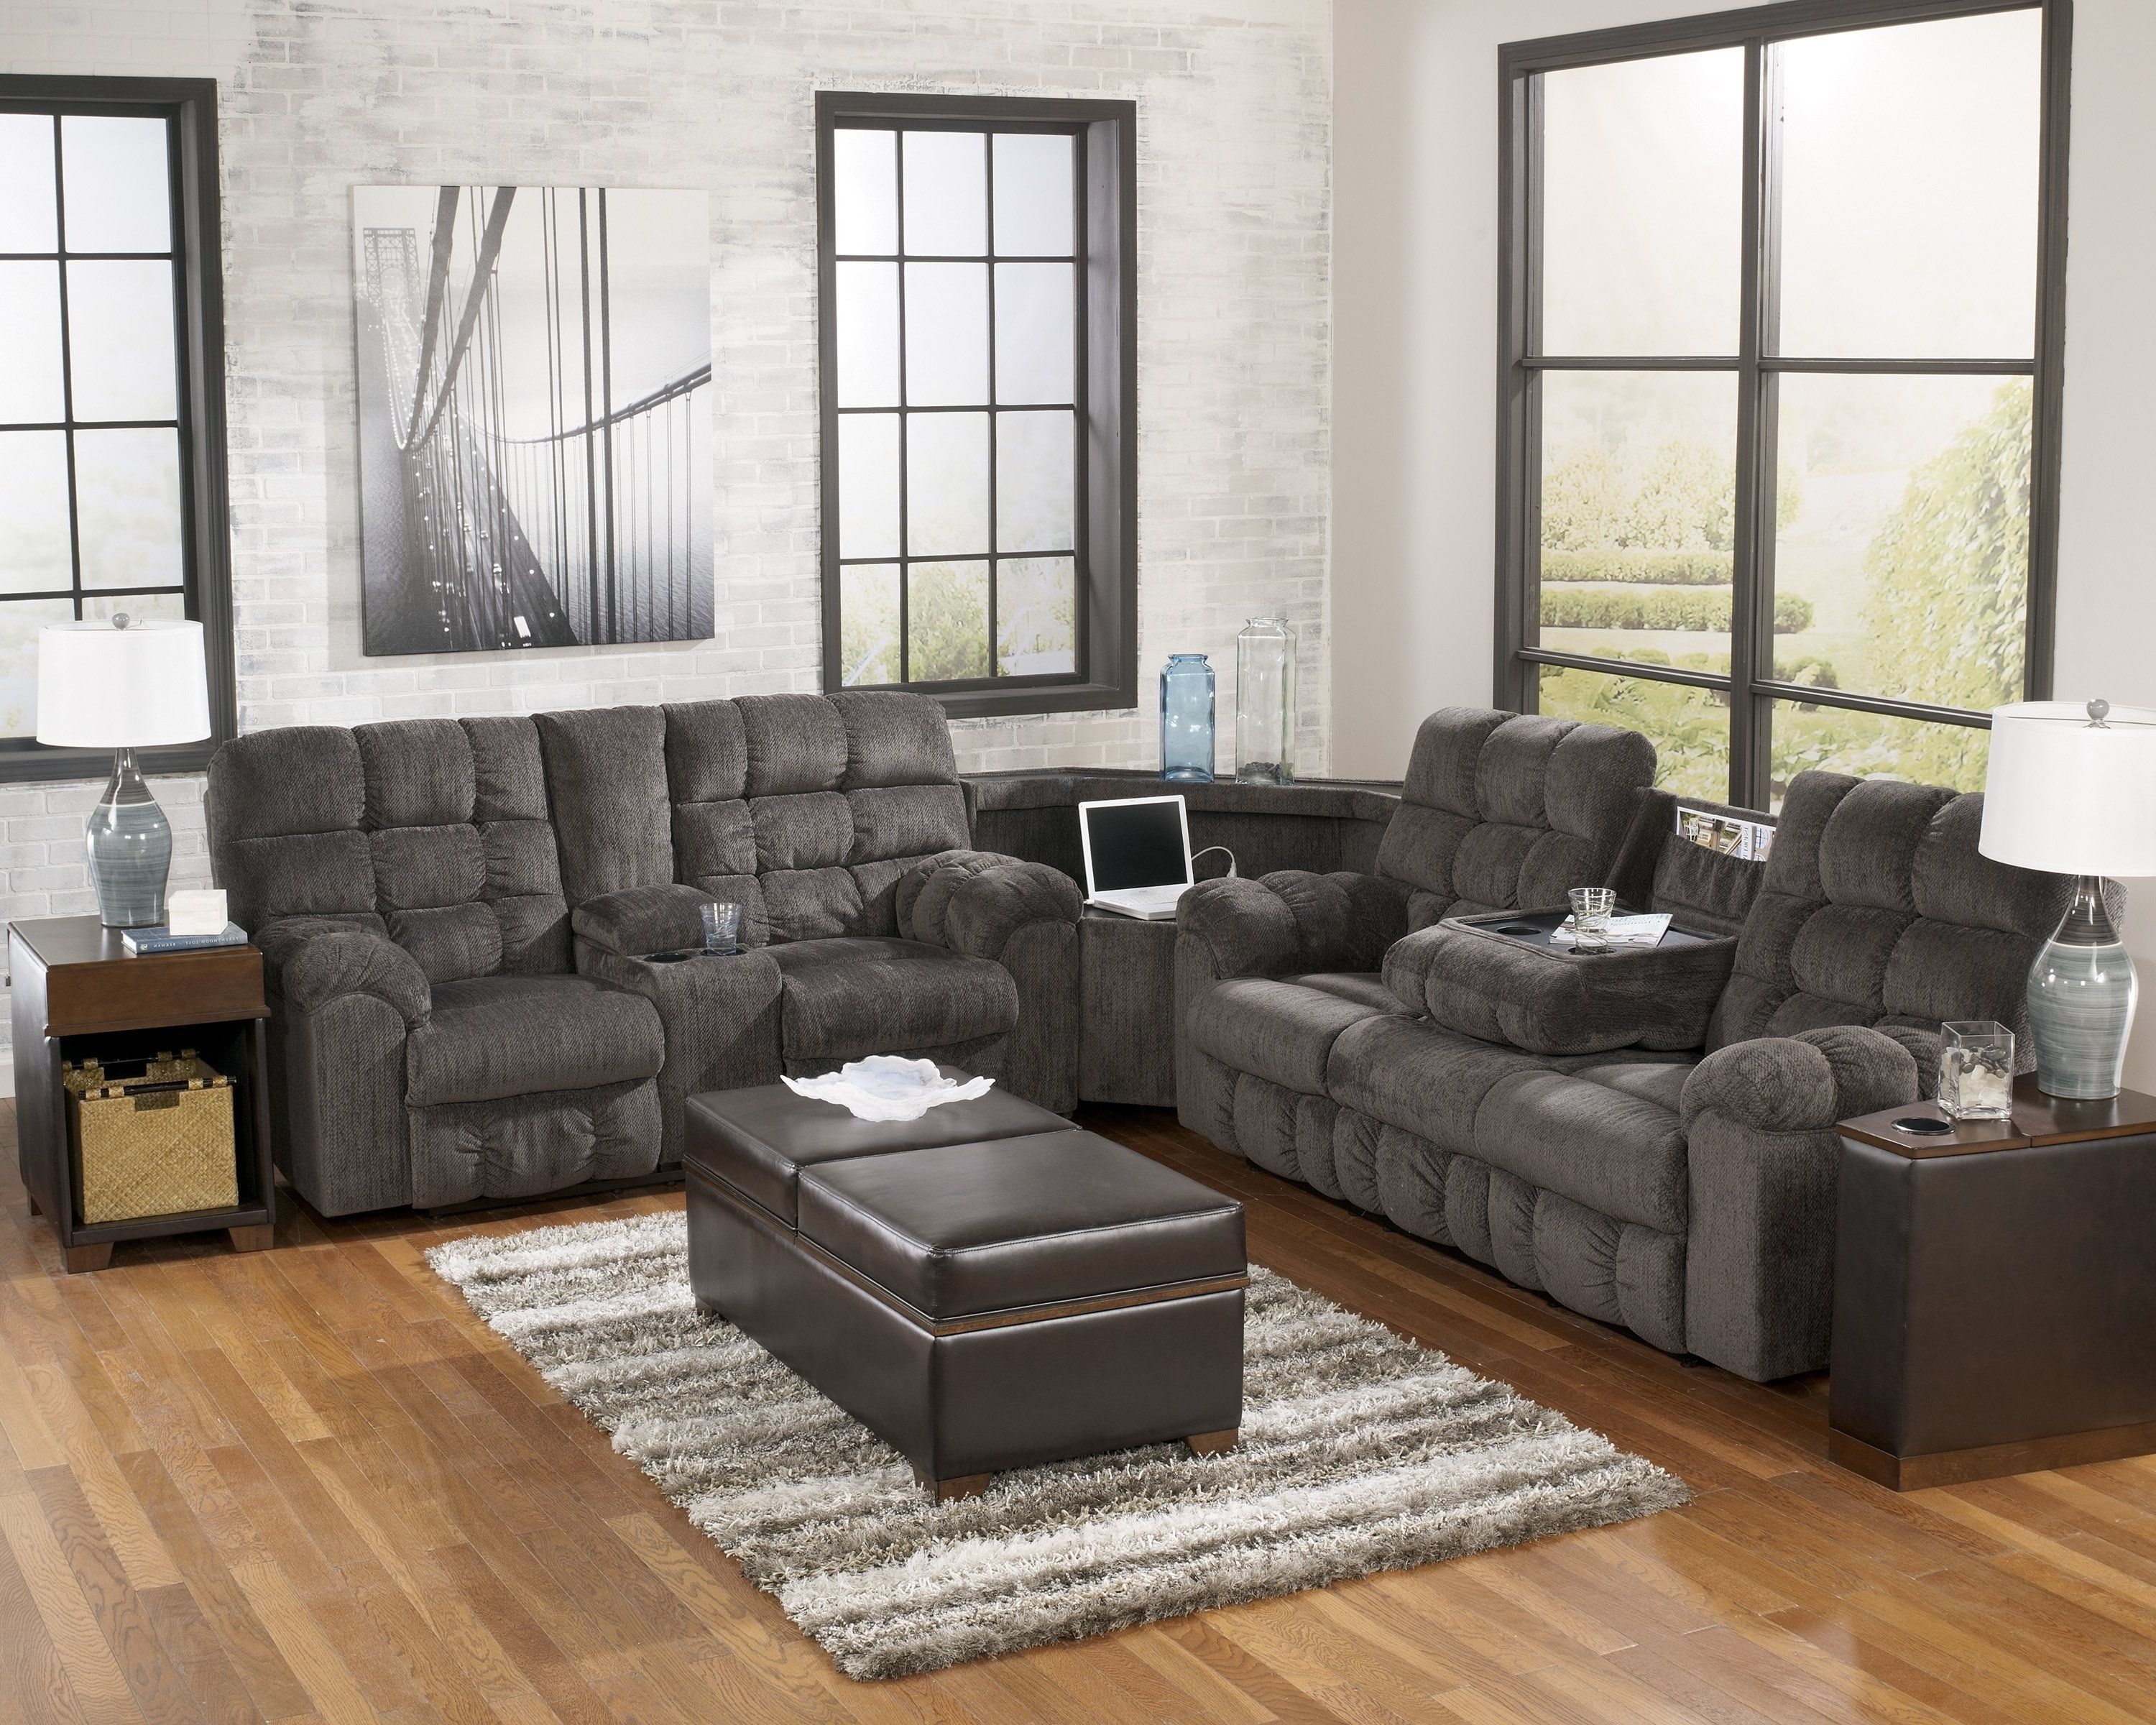 Sofas Center Sectional Sofas Ashley Furniture Excellent Faux For In Latest Sectional Sofas At Ashley (View 5 of 15)